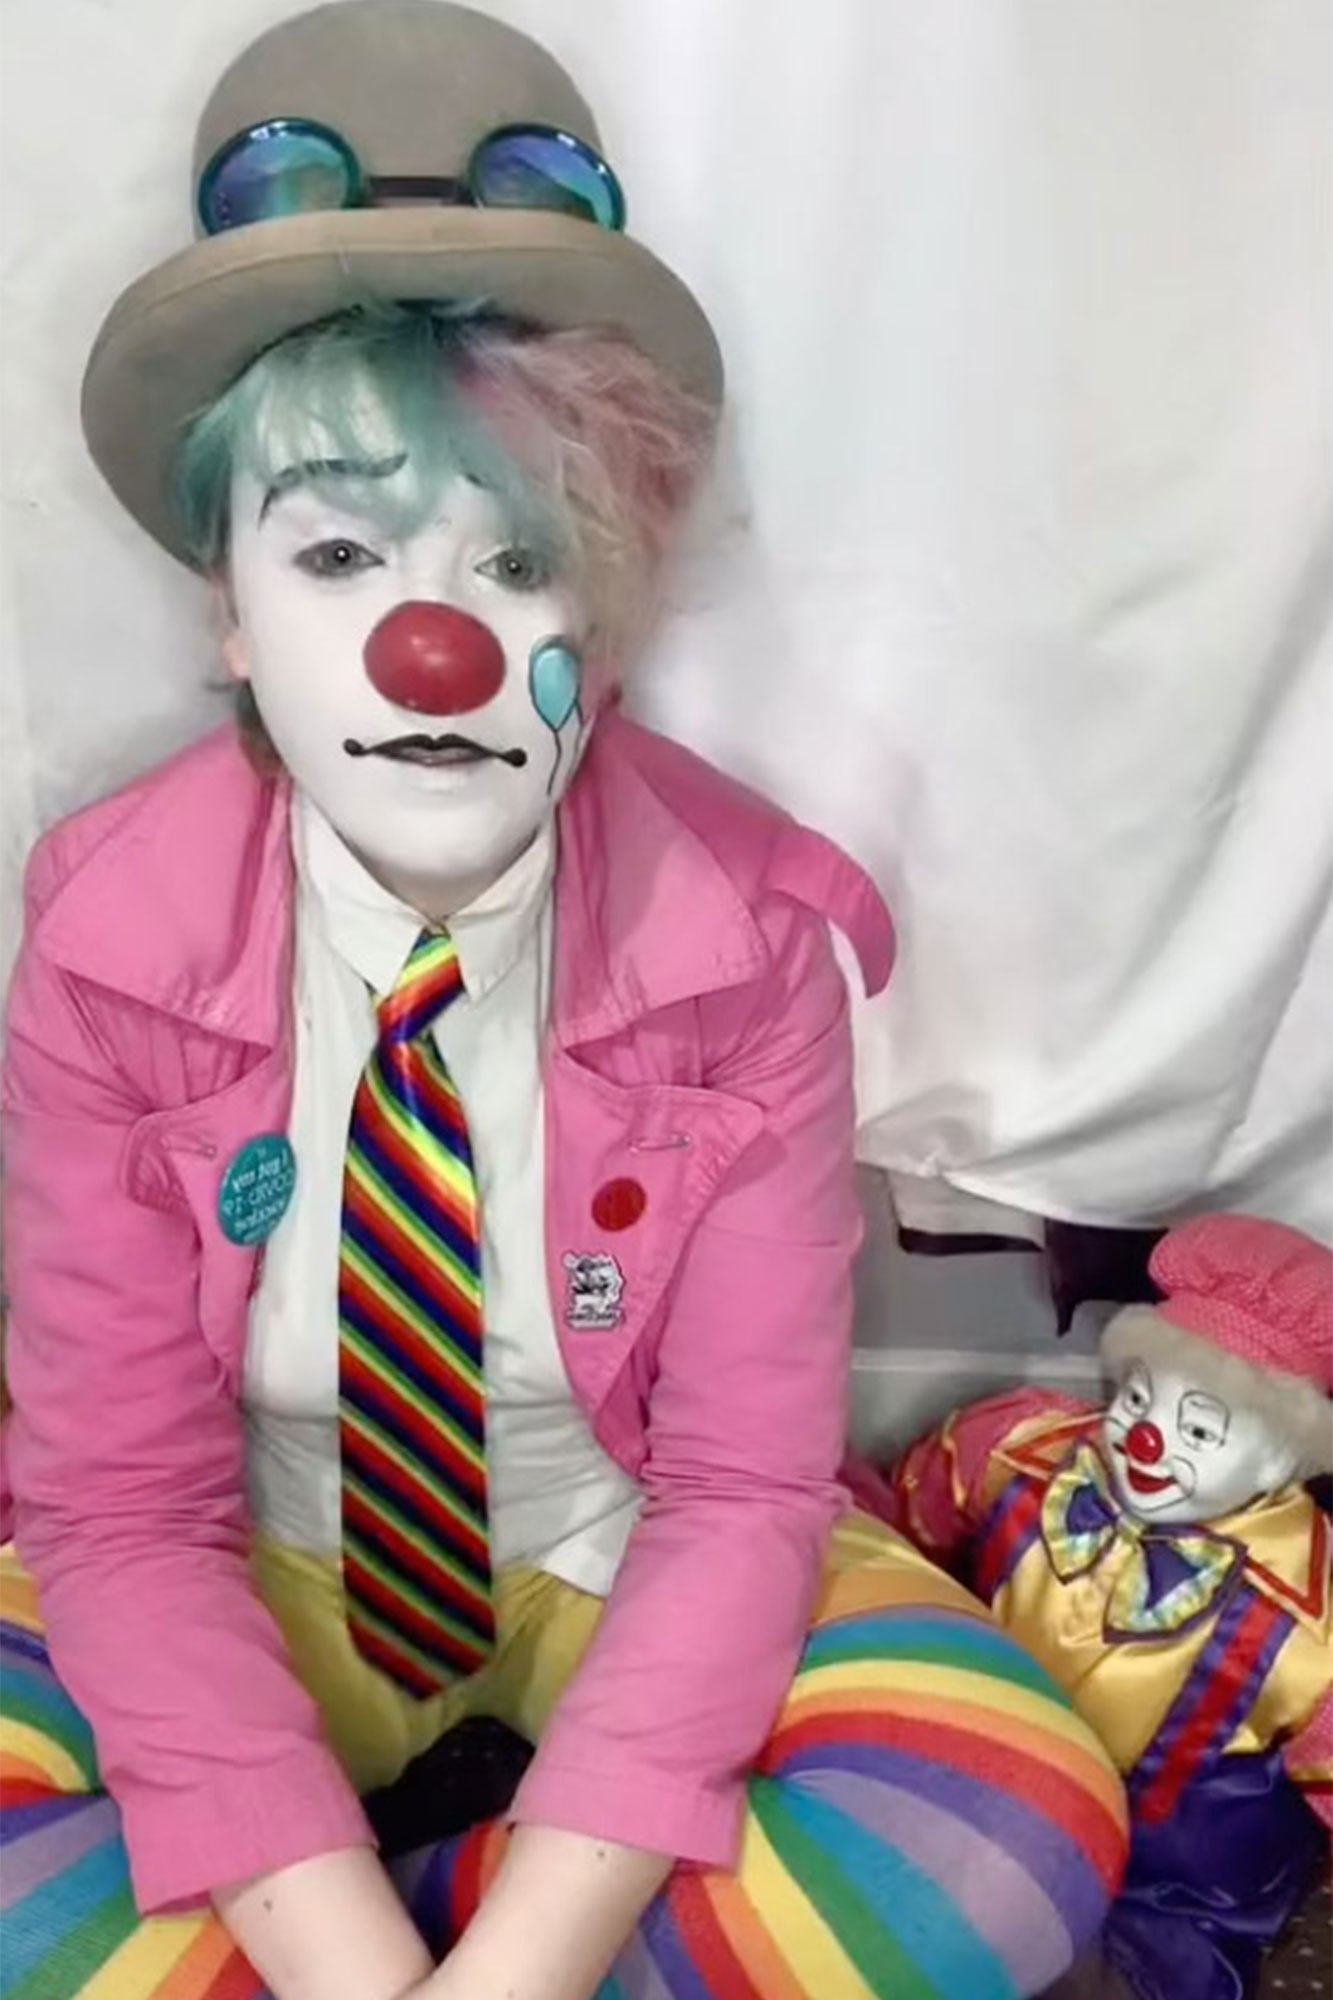 Kazoo the Clown booted off Tinder for violating several terms and conditions